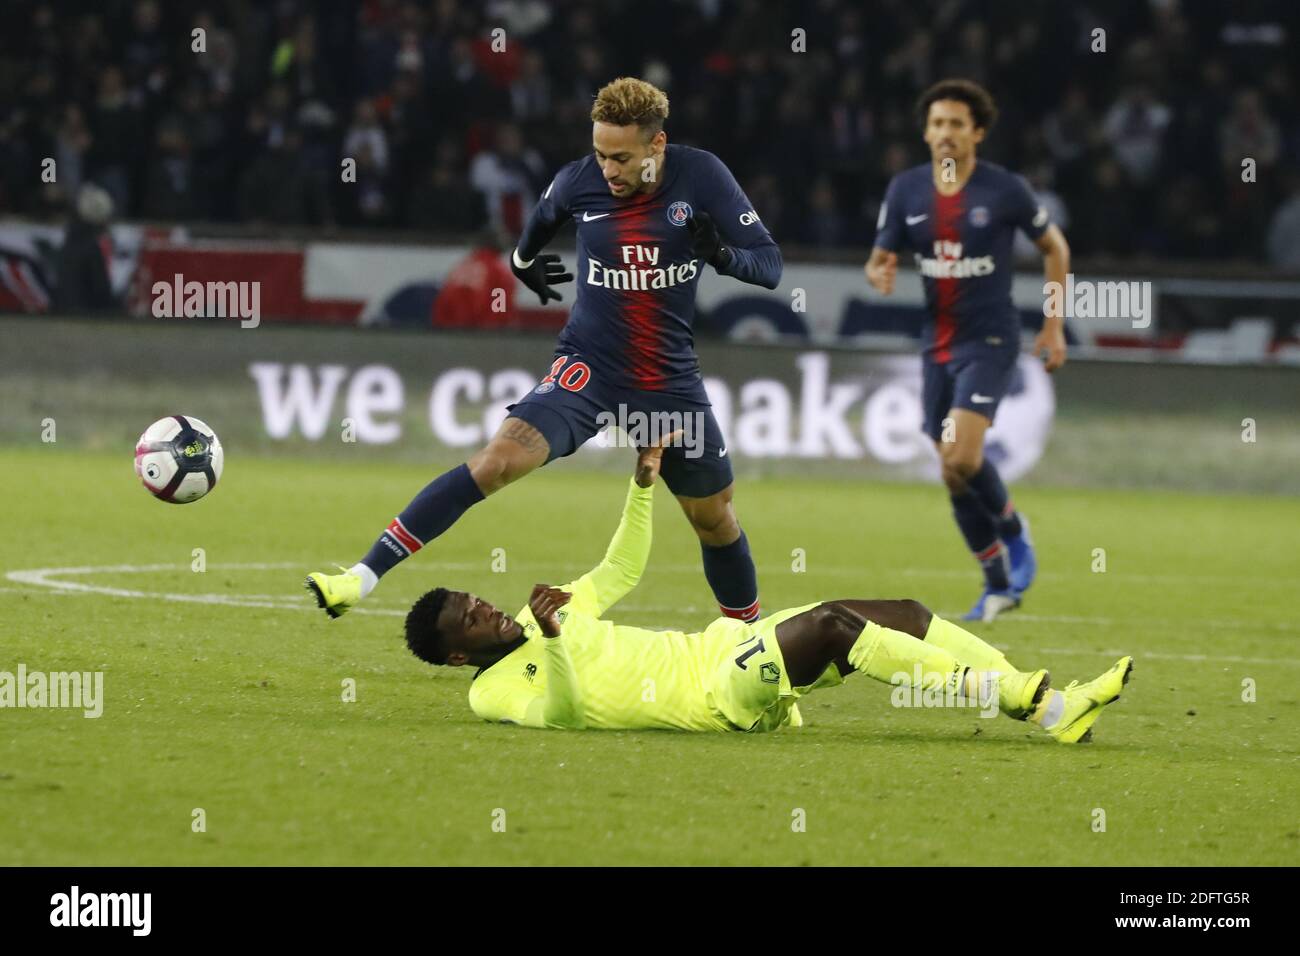 PSG's Neymar battling Lille's Jonathan Bamba during the French First League  soccer match, PSG vs Lille in Parc des Princes, France, on November 2nd,  2018. PSG won 2-1. Photo by Henri Szwarc/ABACAPRESS.COM